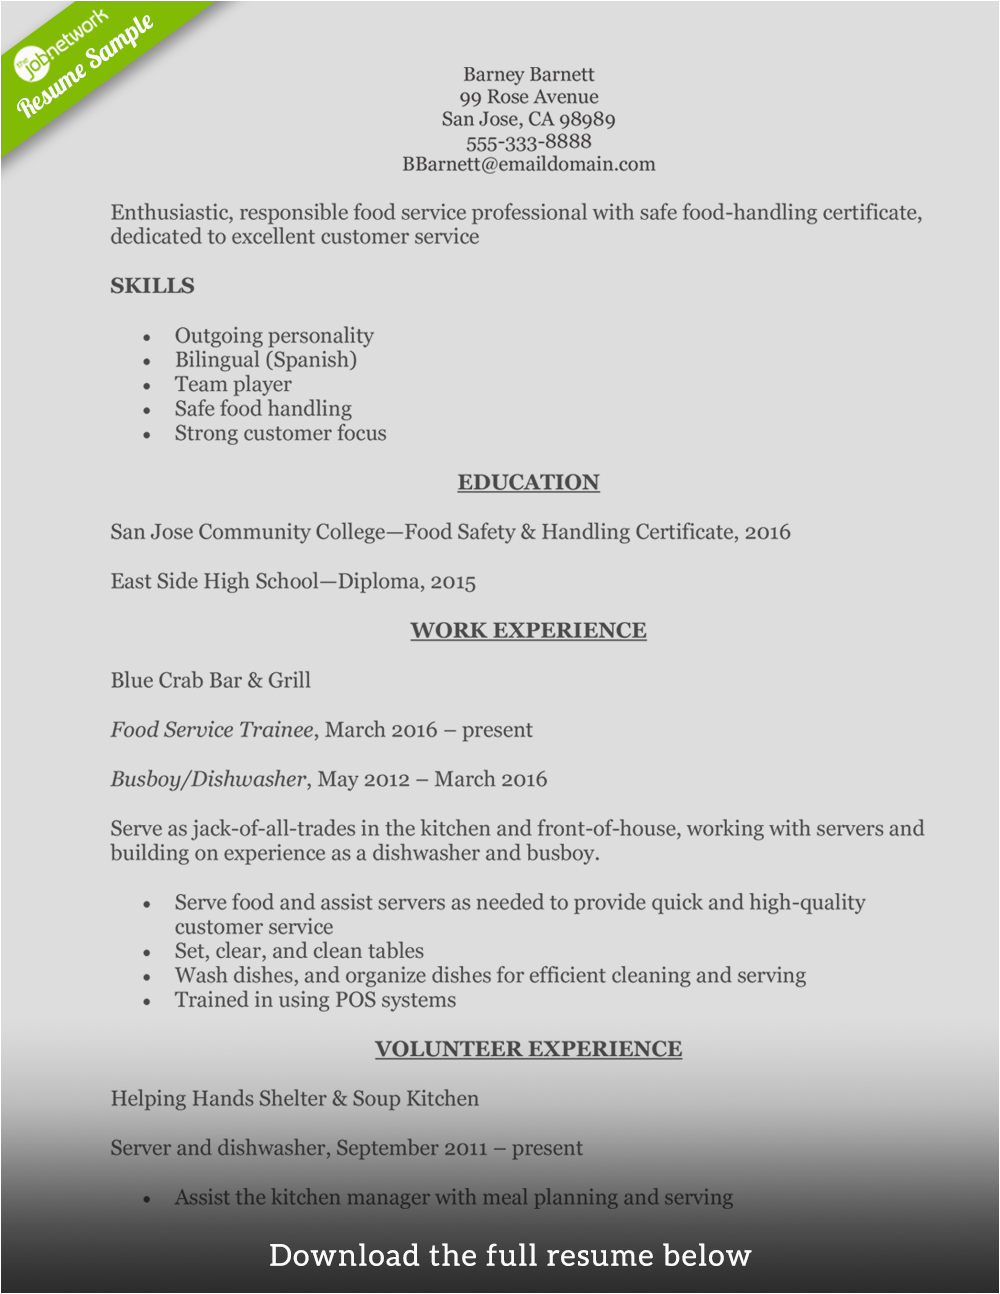 Sample Resume for Entry Level Food Service How to Write A Perfect Food Service Resume Examples Included